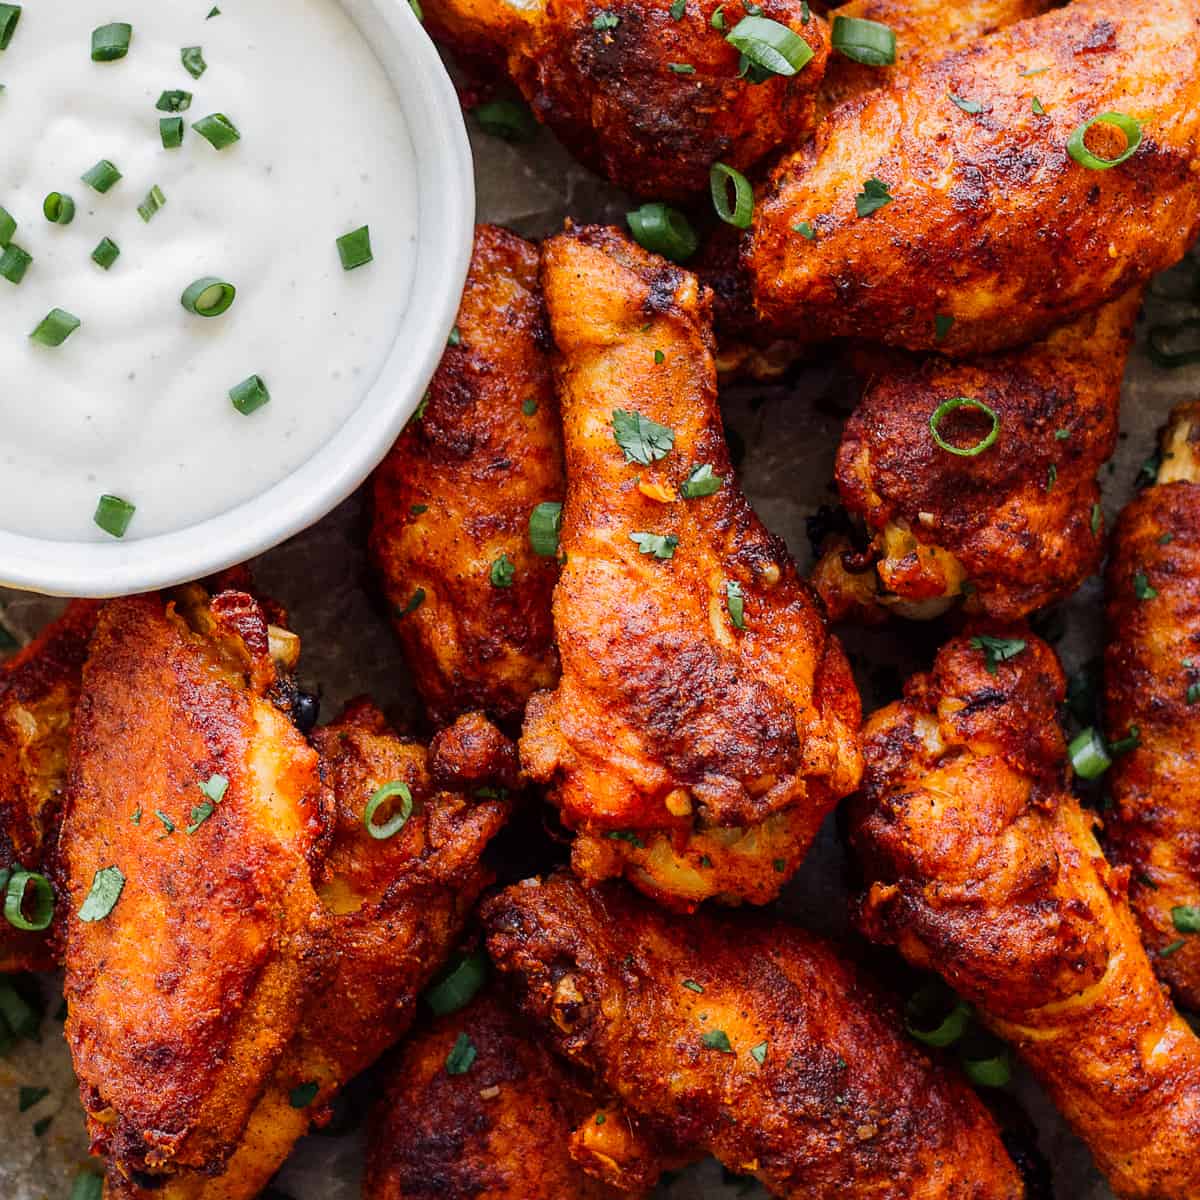 Top 3 Baked Chicken Wing Recipes